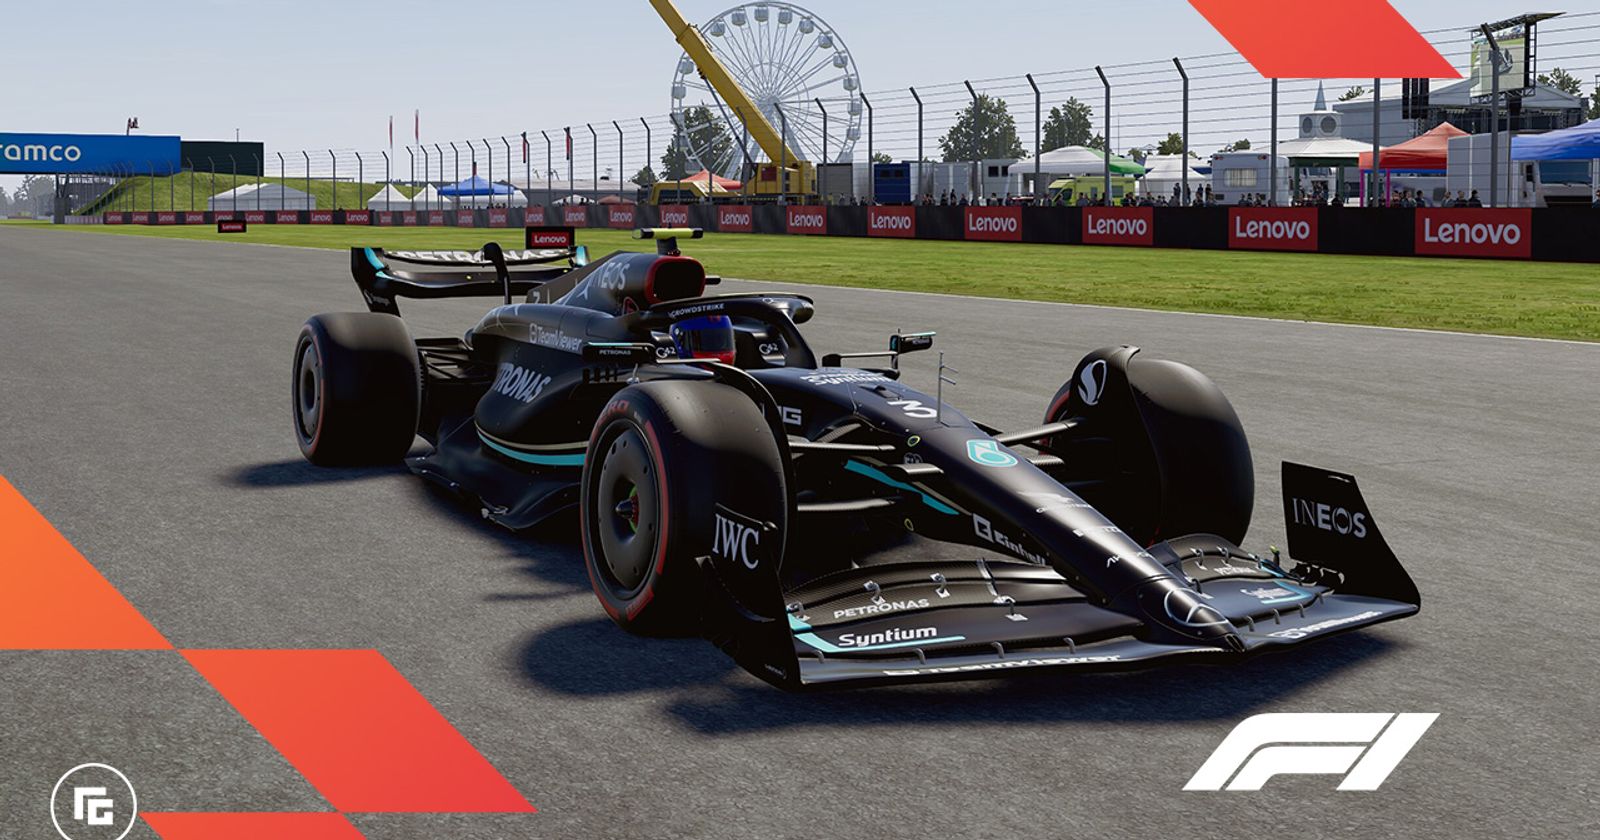 How to access the F1 23 game early